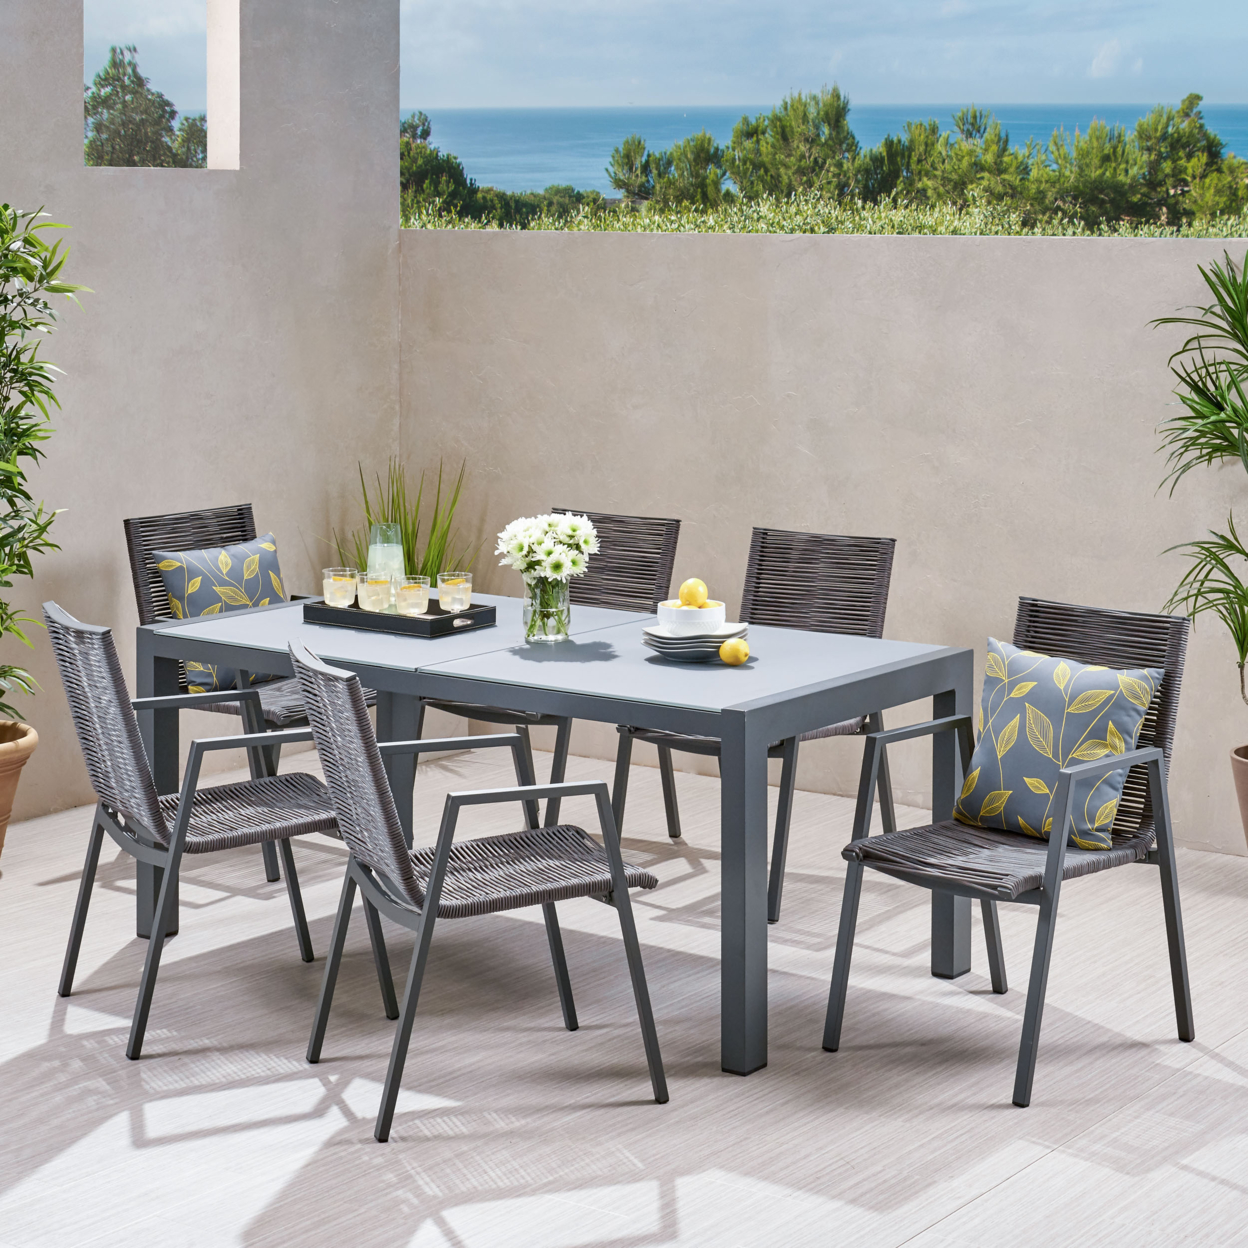 Beenle Outdoor Modern 6 Seater Aluminum Dining Set With Tempered Glass Top - Gray + Dark Gray